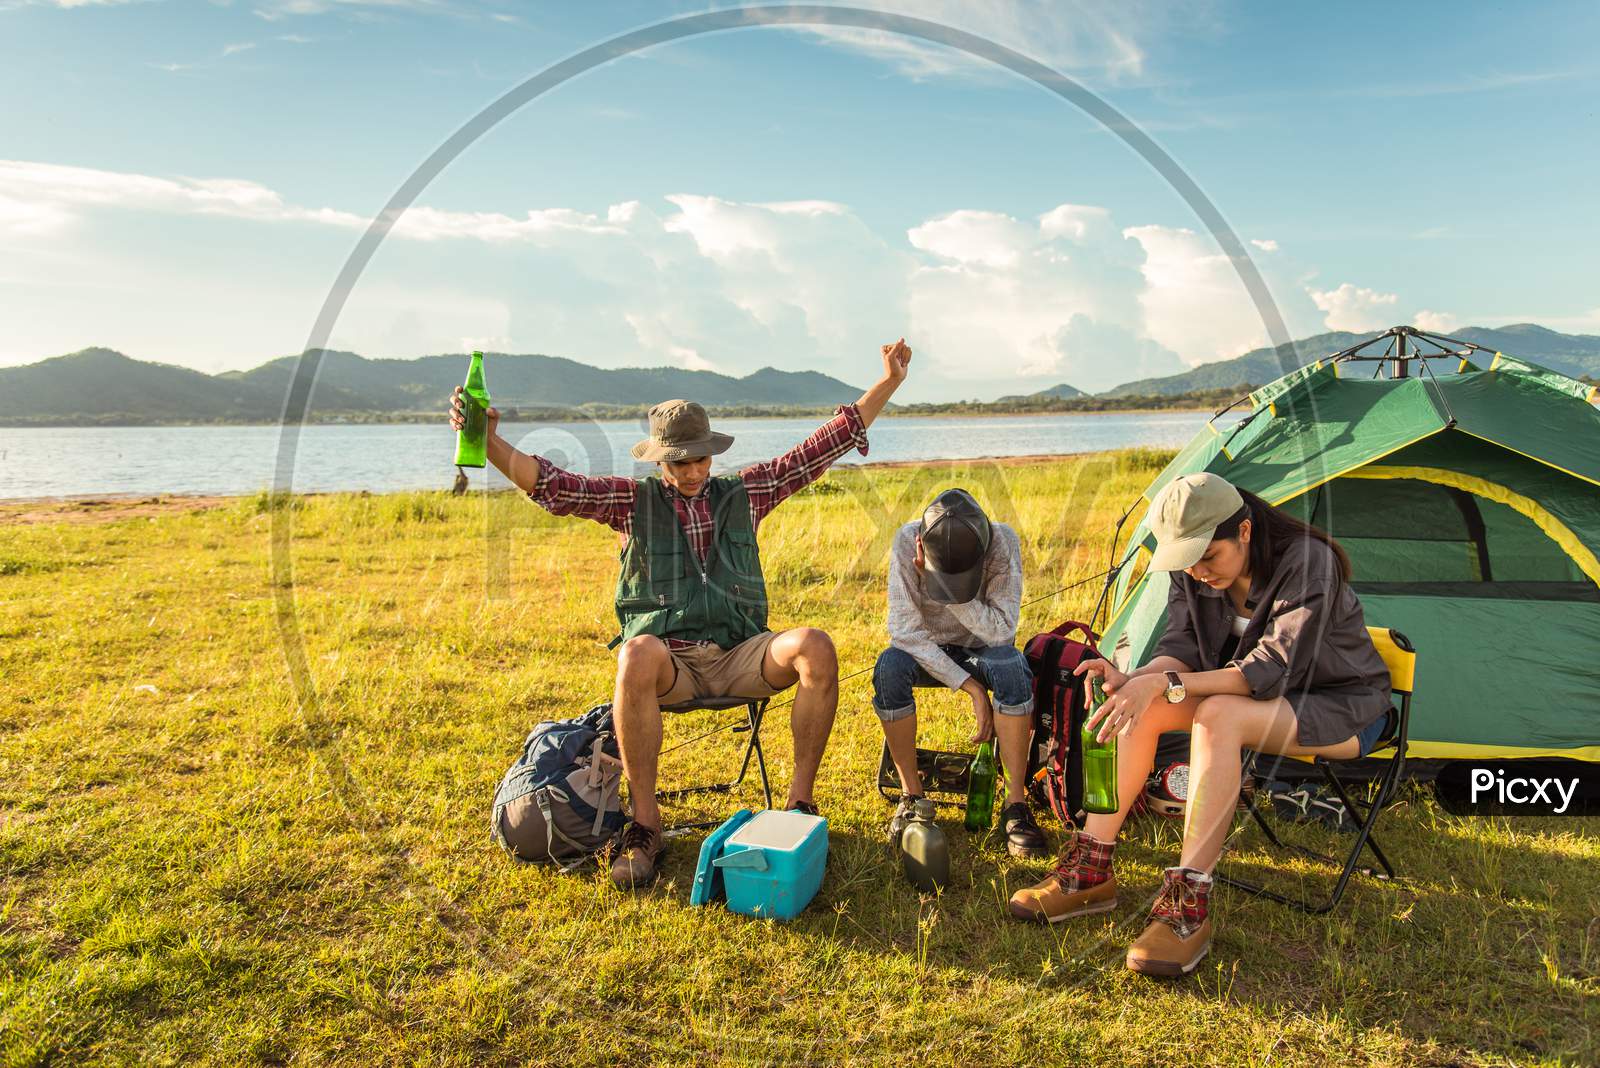 Drunken Tourists Doing Party While Camping And Picnic In Meadow Field. Mountain And Lake Background. People And Lifestyles Concept. Outdoors Activity And Leisure Theme. Backpacker And Hiker Theme